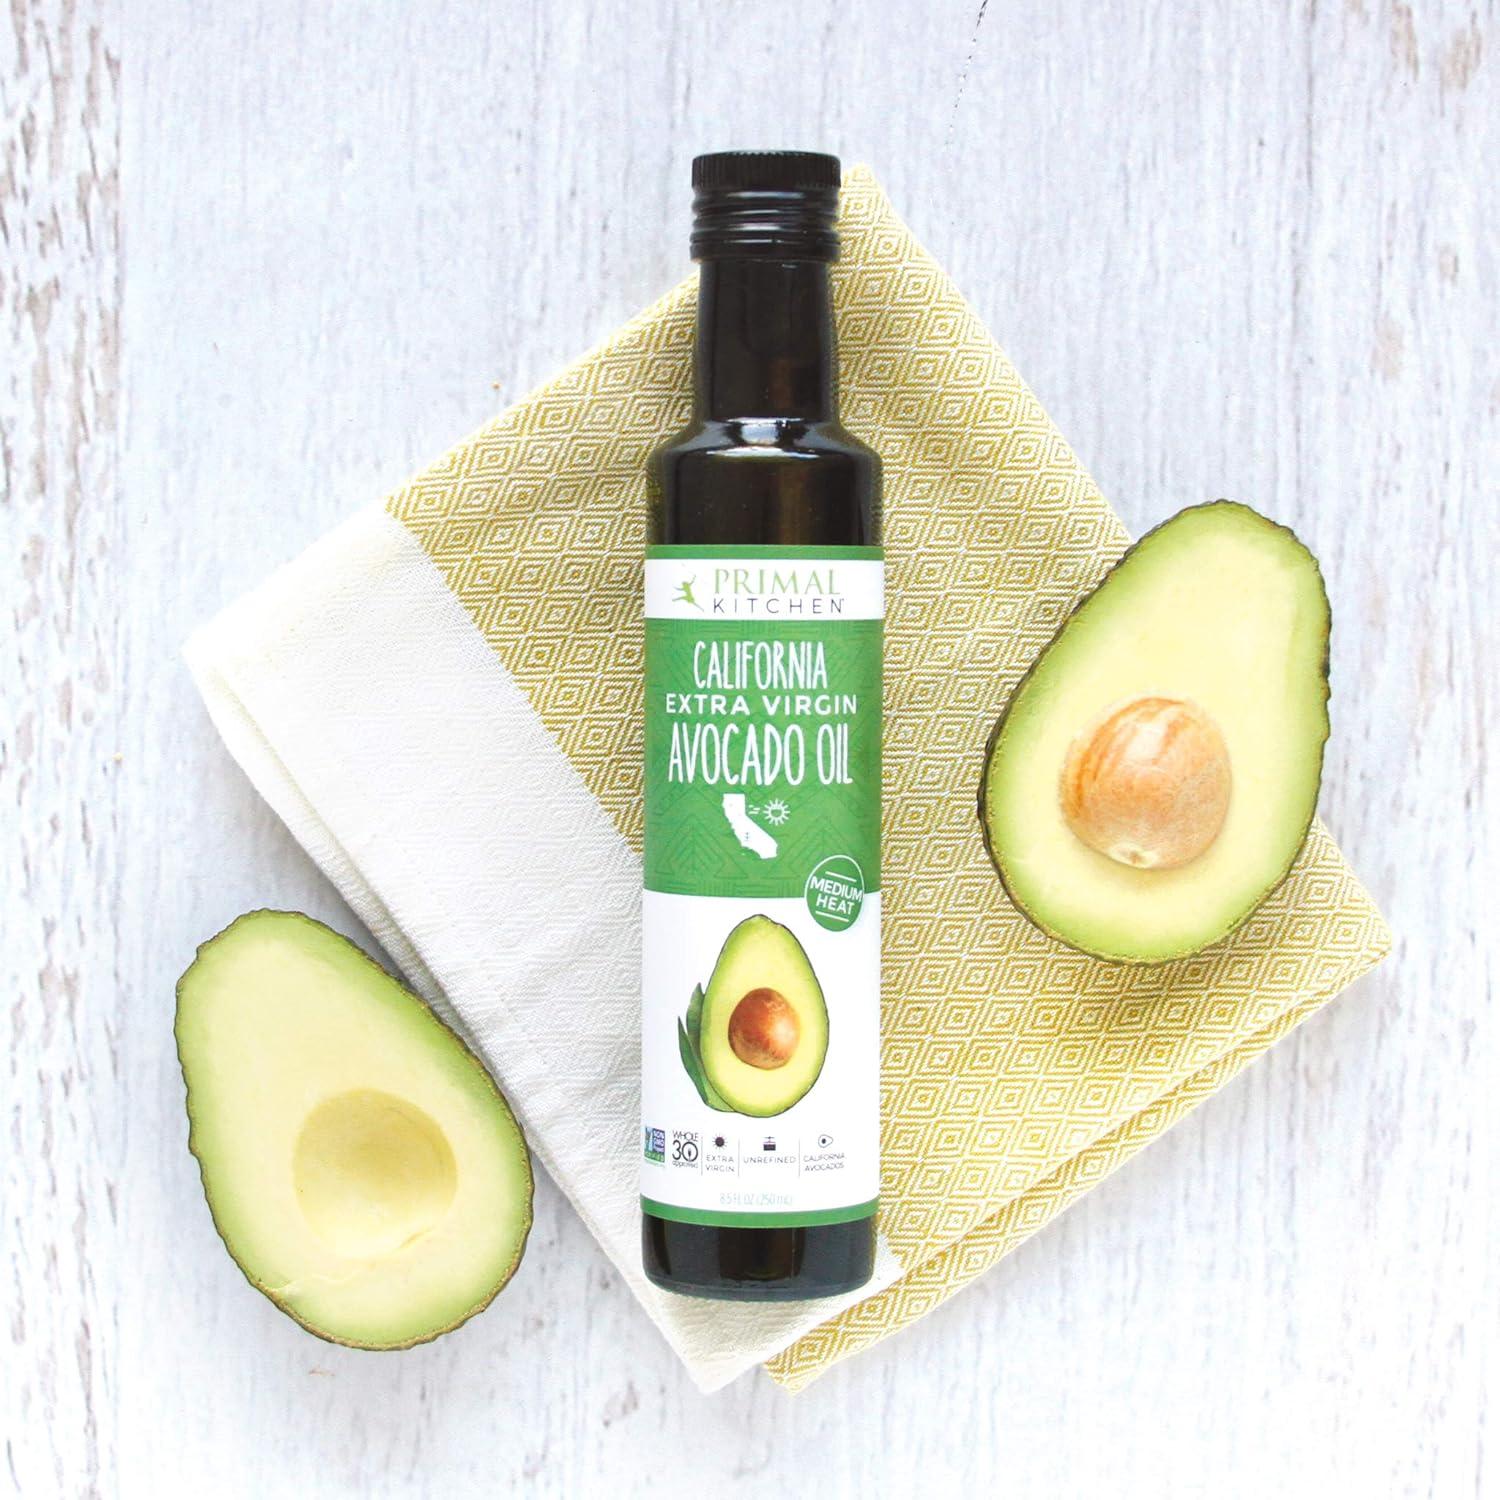 Primal Kitchen Condiment Dipping Kit - Contains Avocado Oil